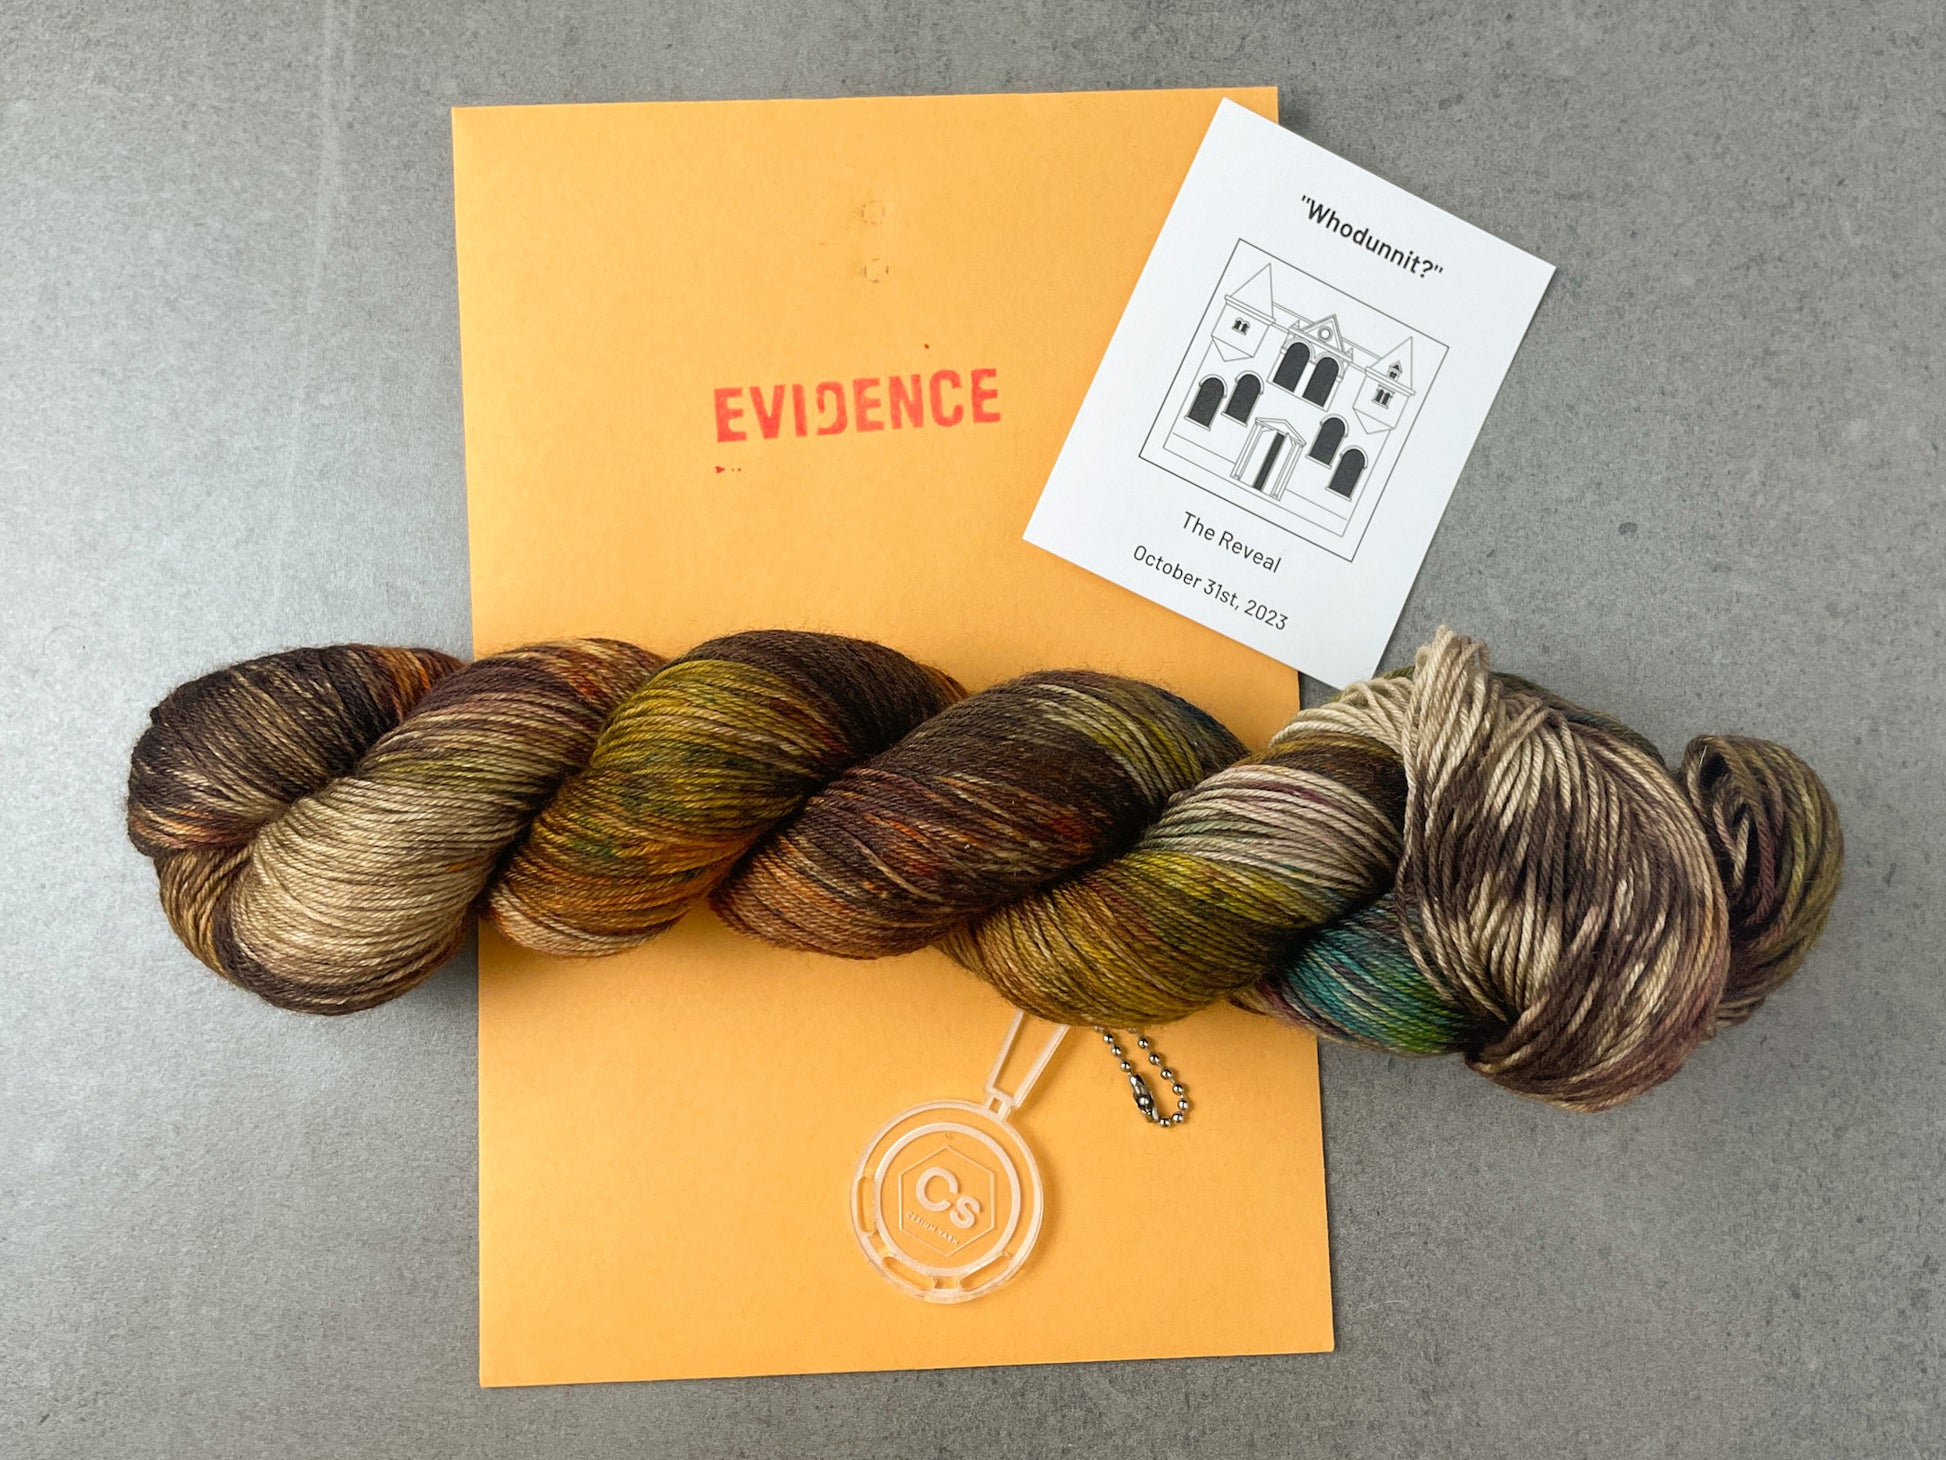 A skein of brown, yellow, tan, and green variegated yarn on top of an envelope stamped with "Evidence" and a card with a drawing of the Clue mansion on it.